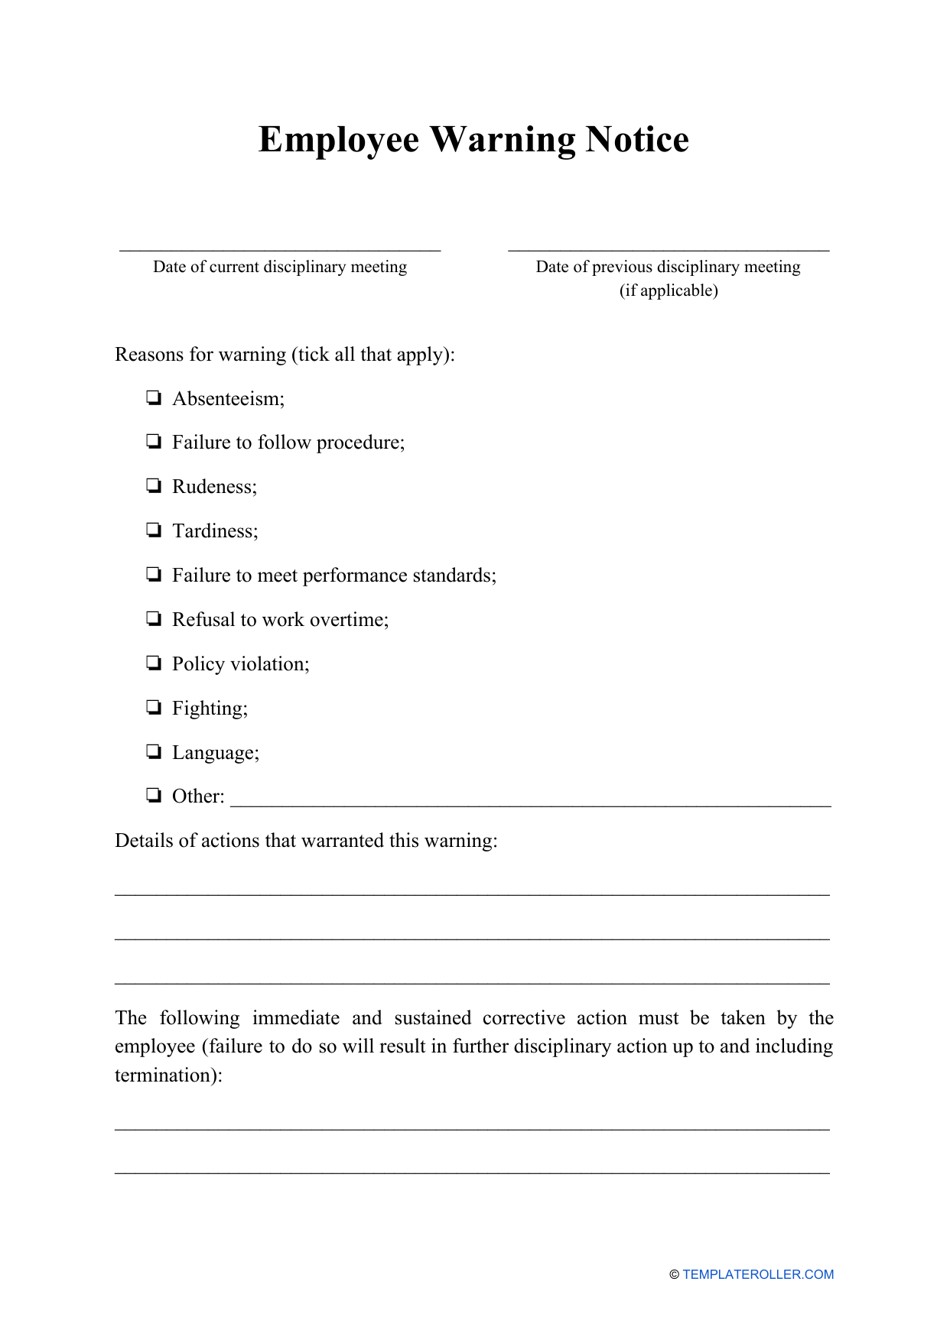 Employee Warning Notice Template, Page 1